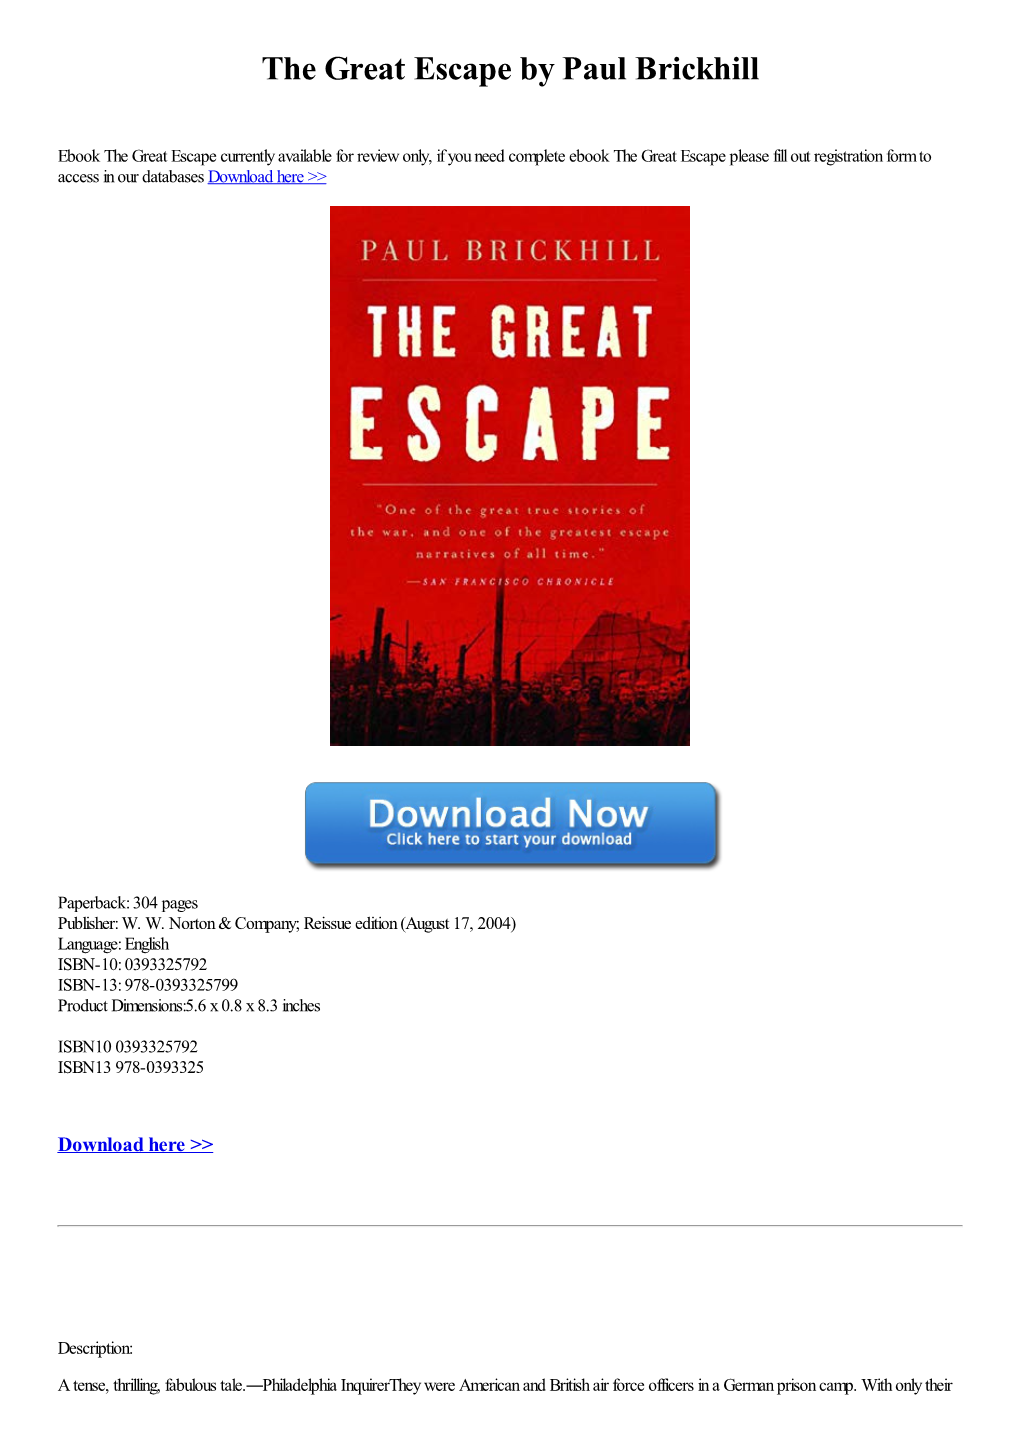 The Great Escape by Paul Brickhill [PDF]